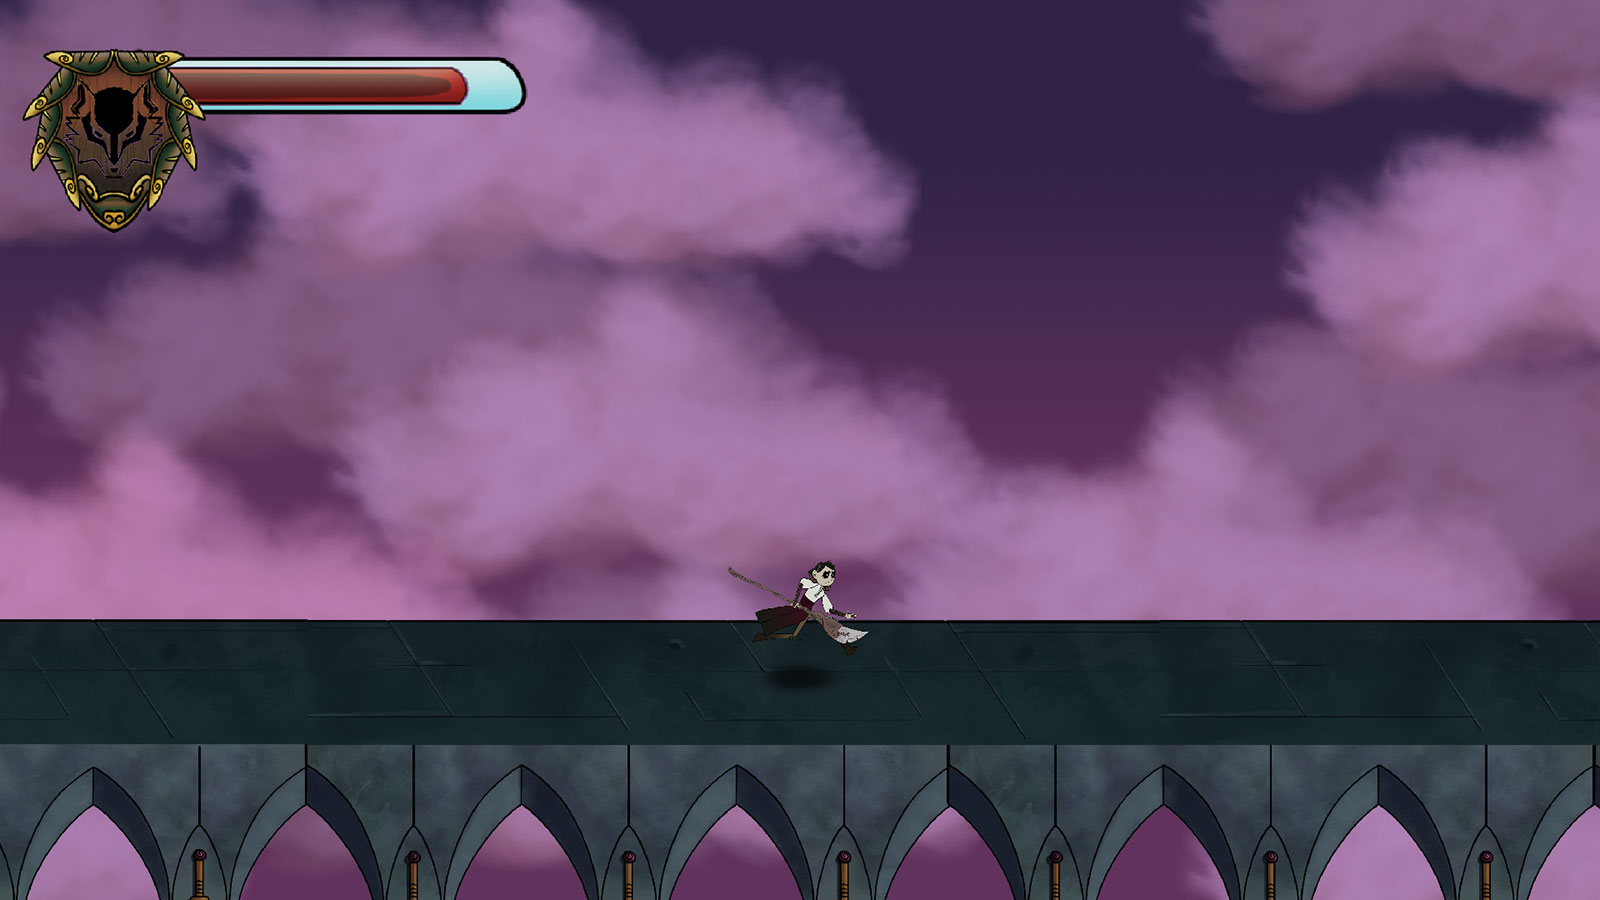 Panned-out view of player running along an aqueduct against a purple sky